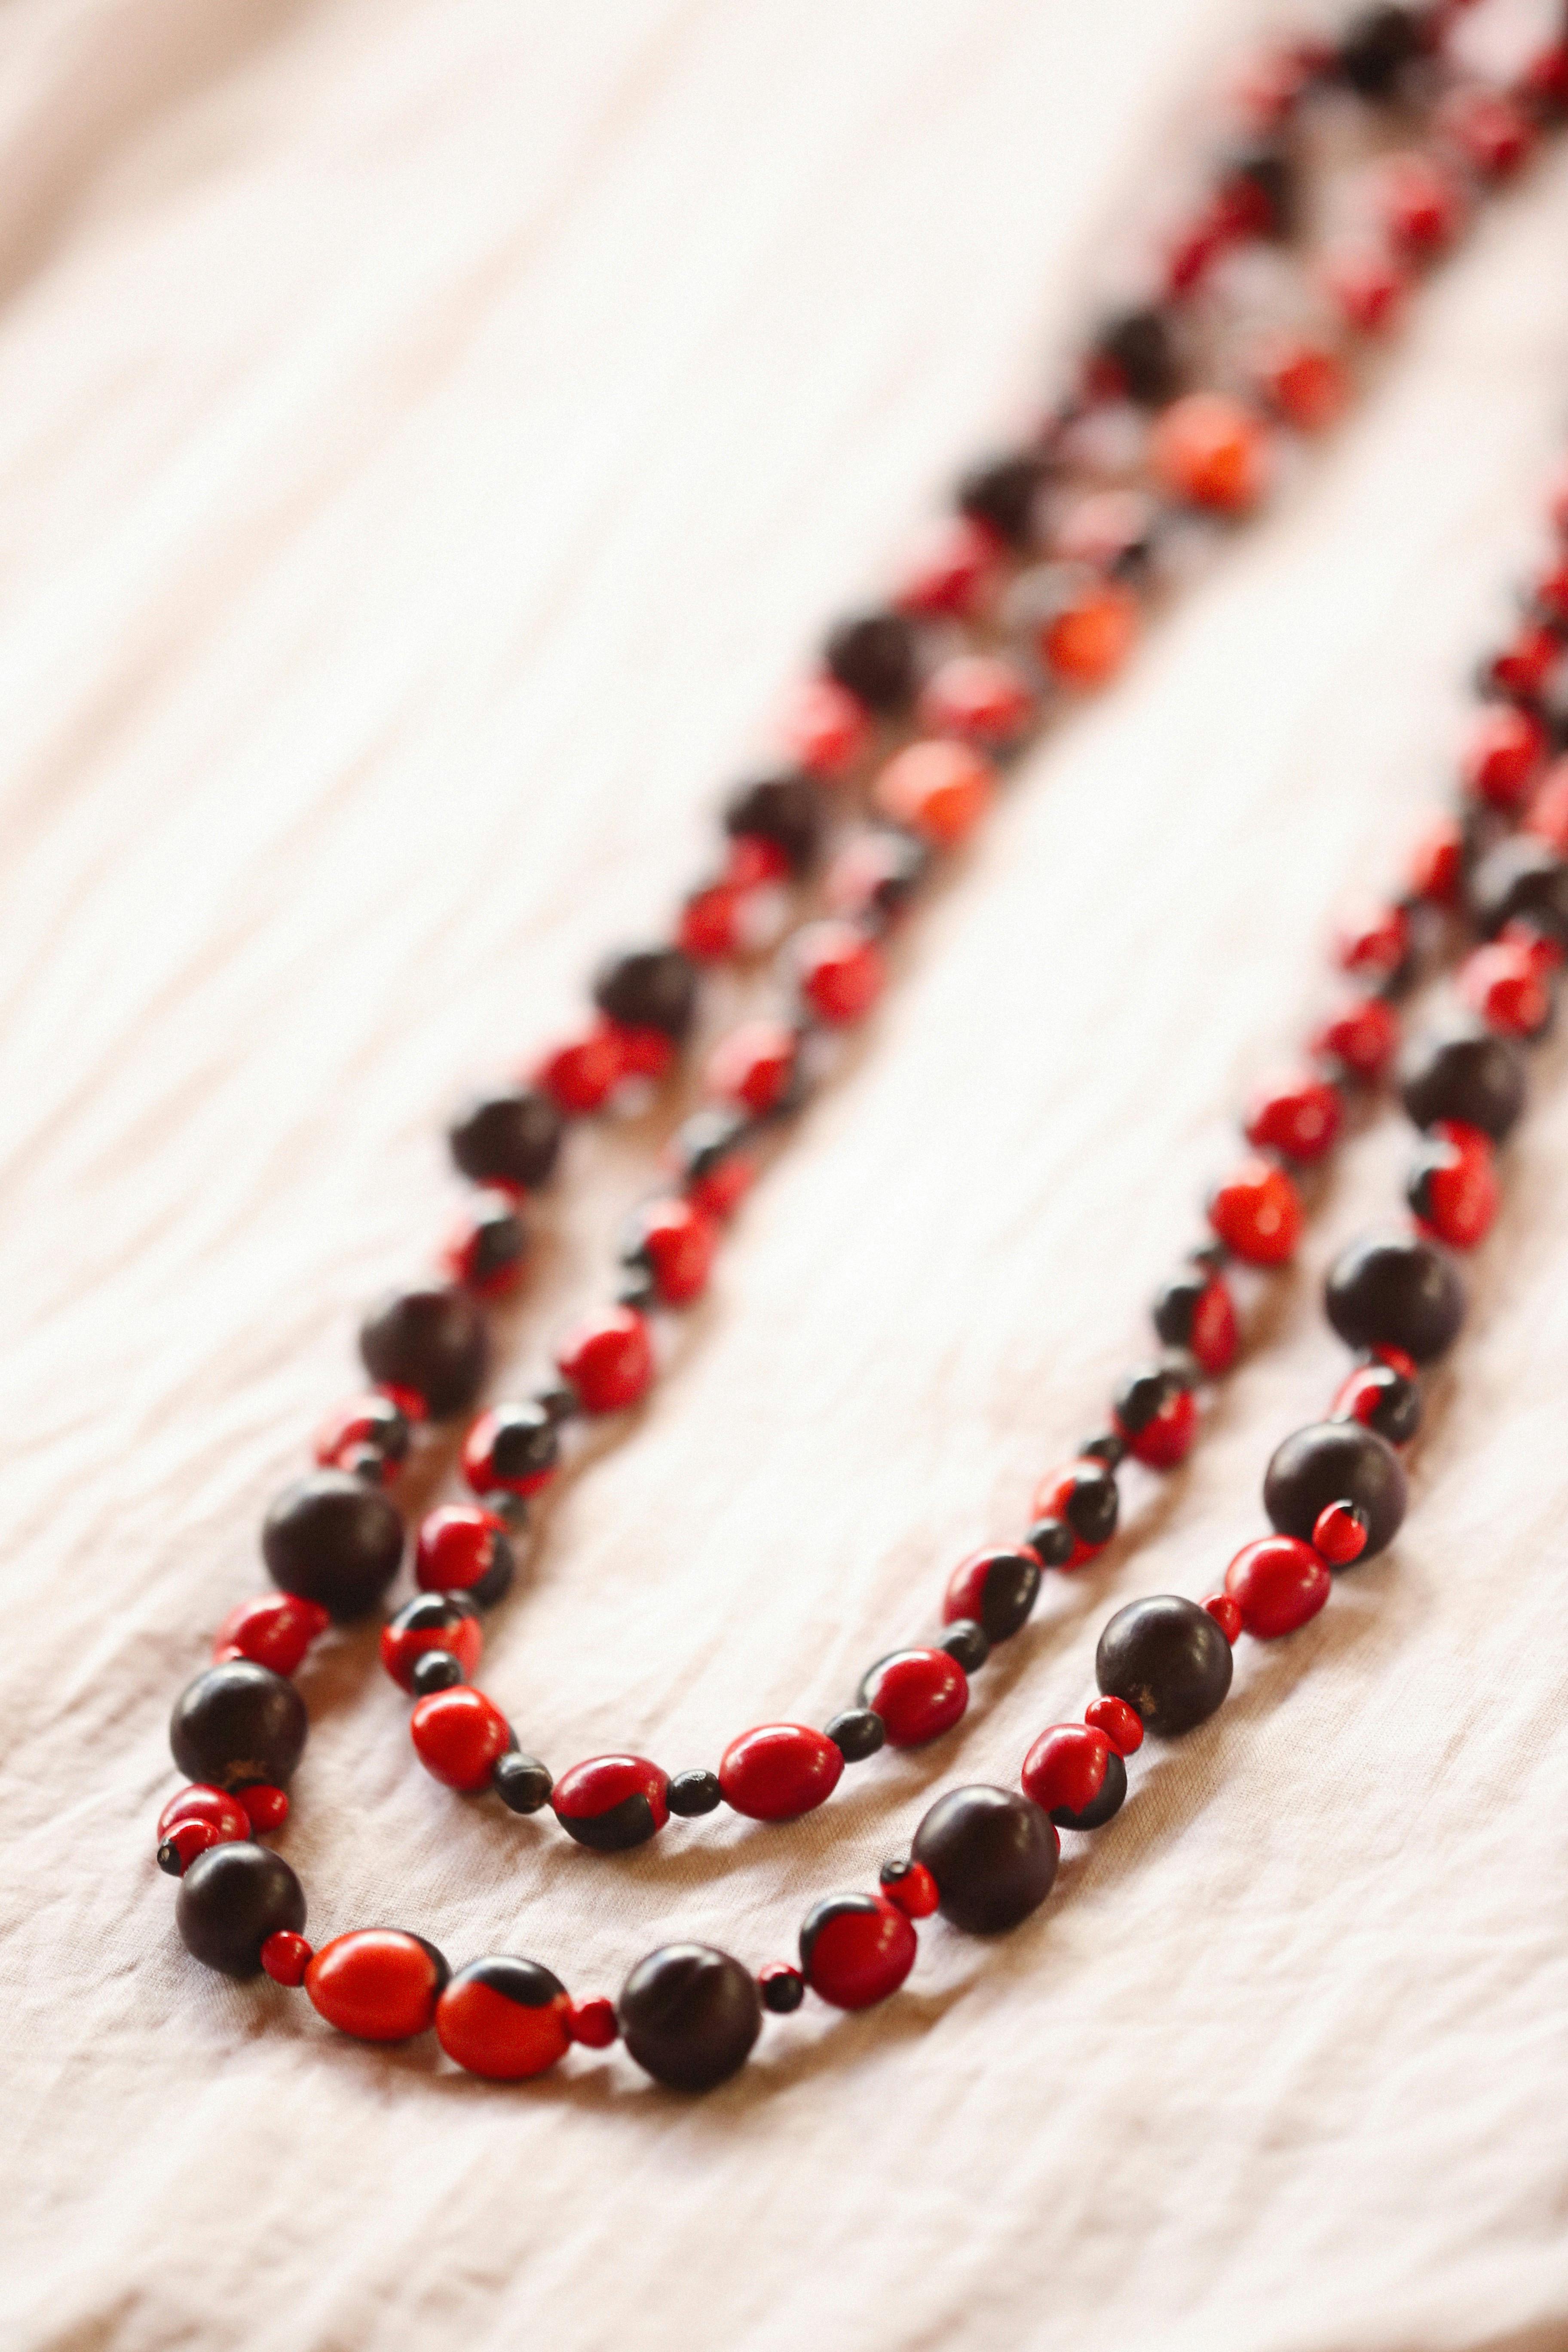 Buy Beaded Choker Necklace, Red and Black Seed Beads Online in India - Etsy